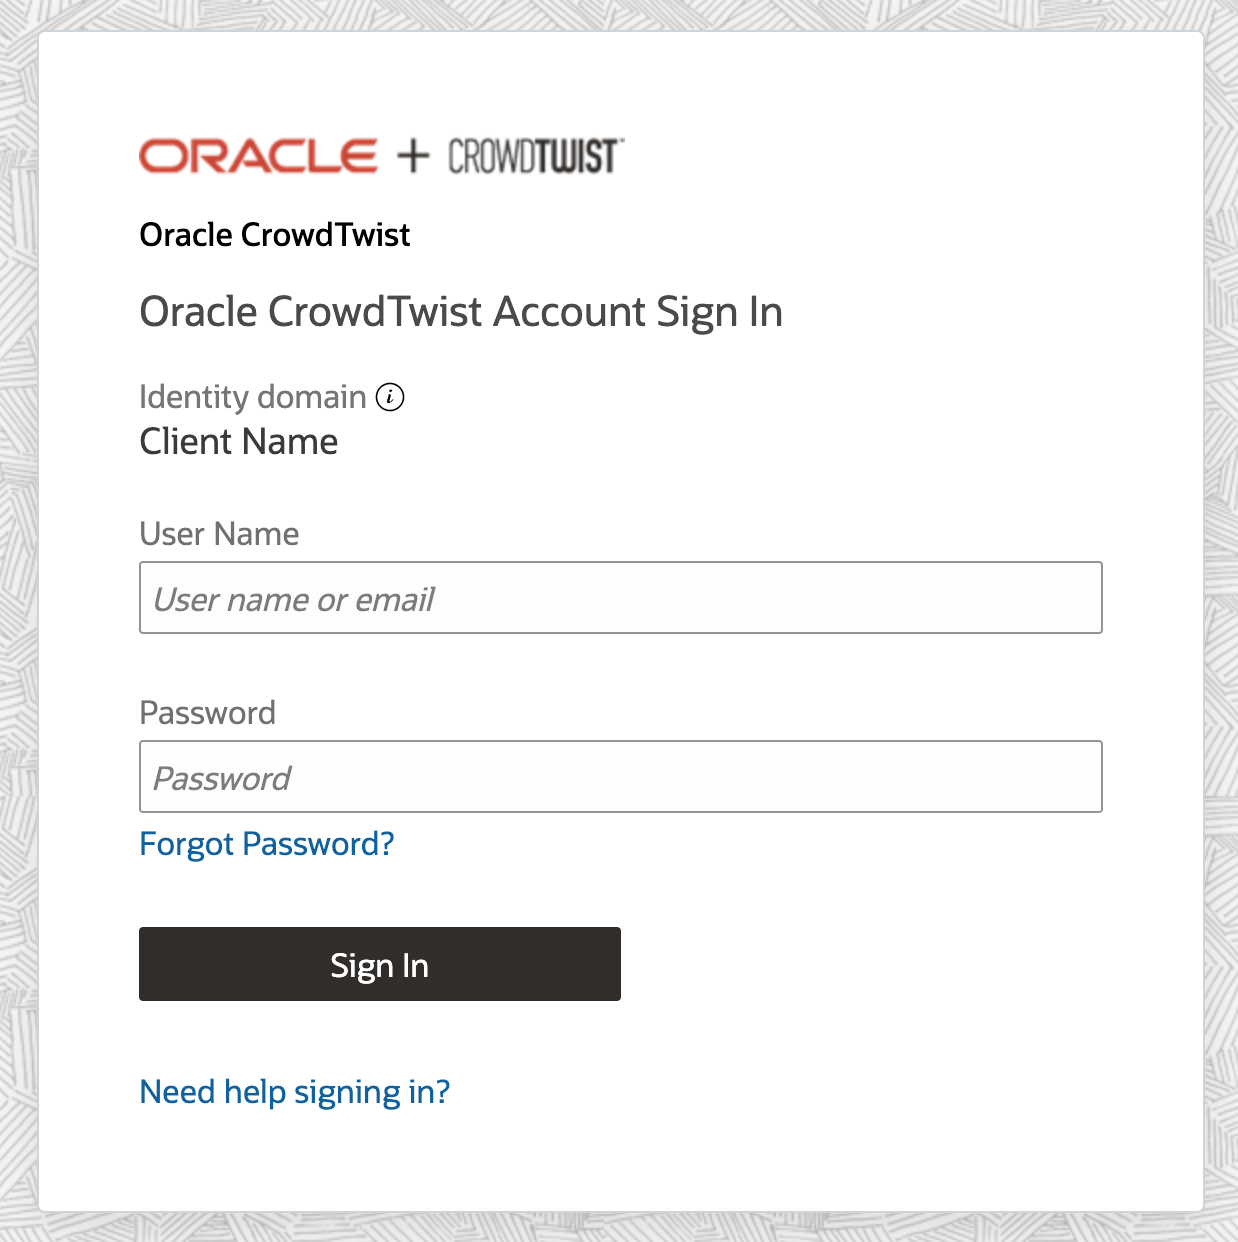 This image displays the CrowdTwist login window as it will appear when integrated with Oracle’s Identity Cloud Service authentication tool.